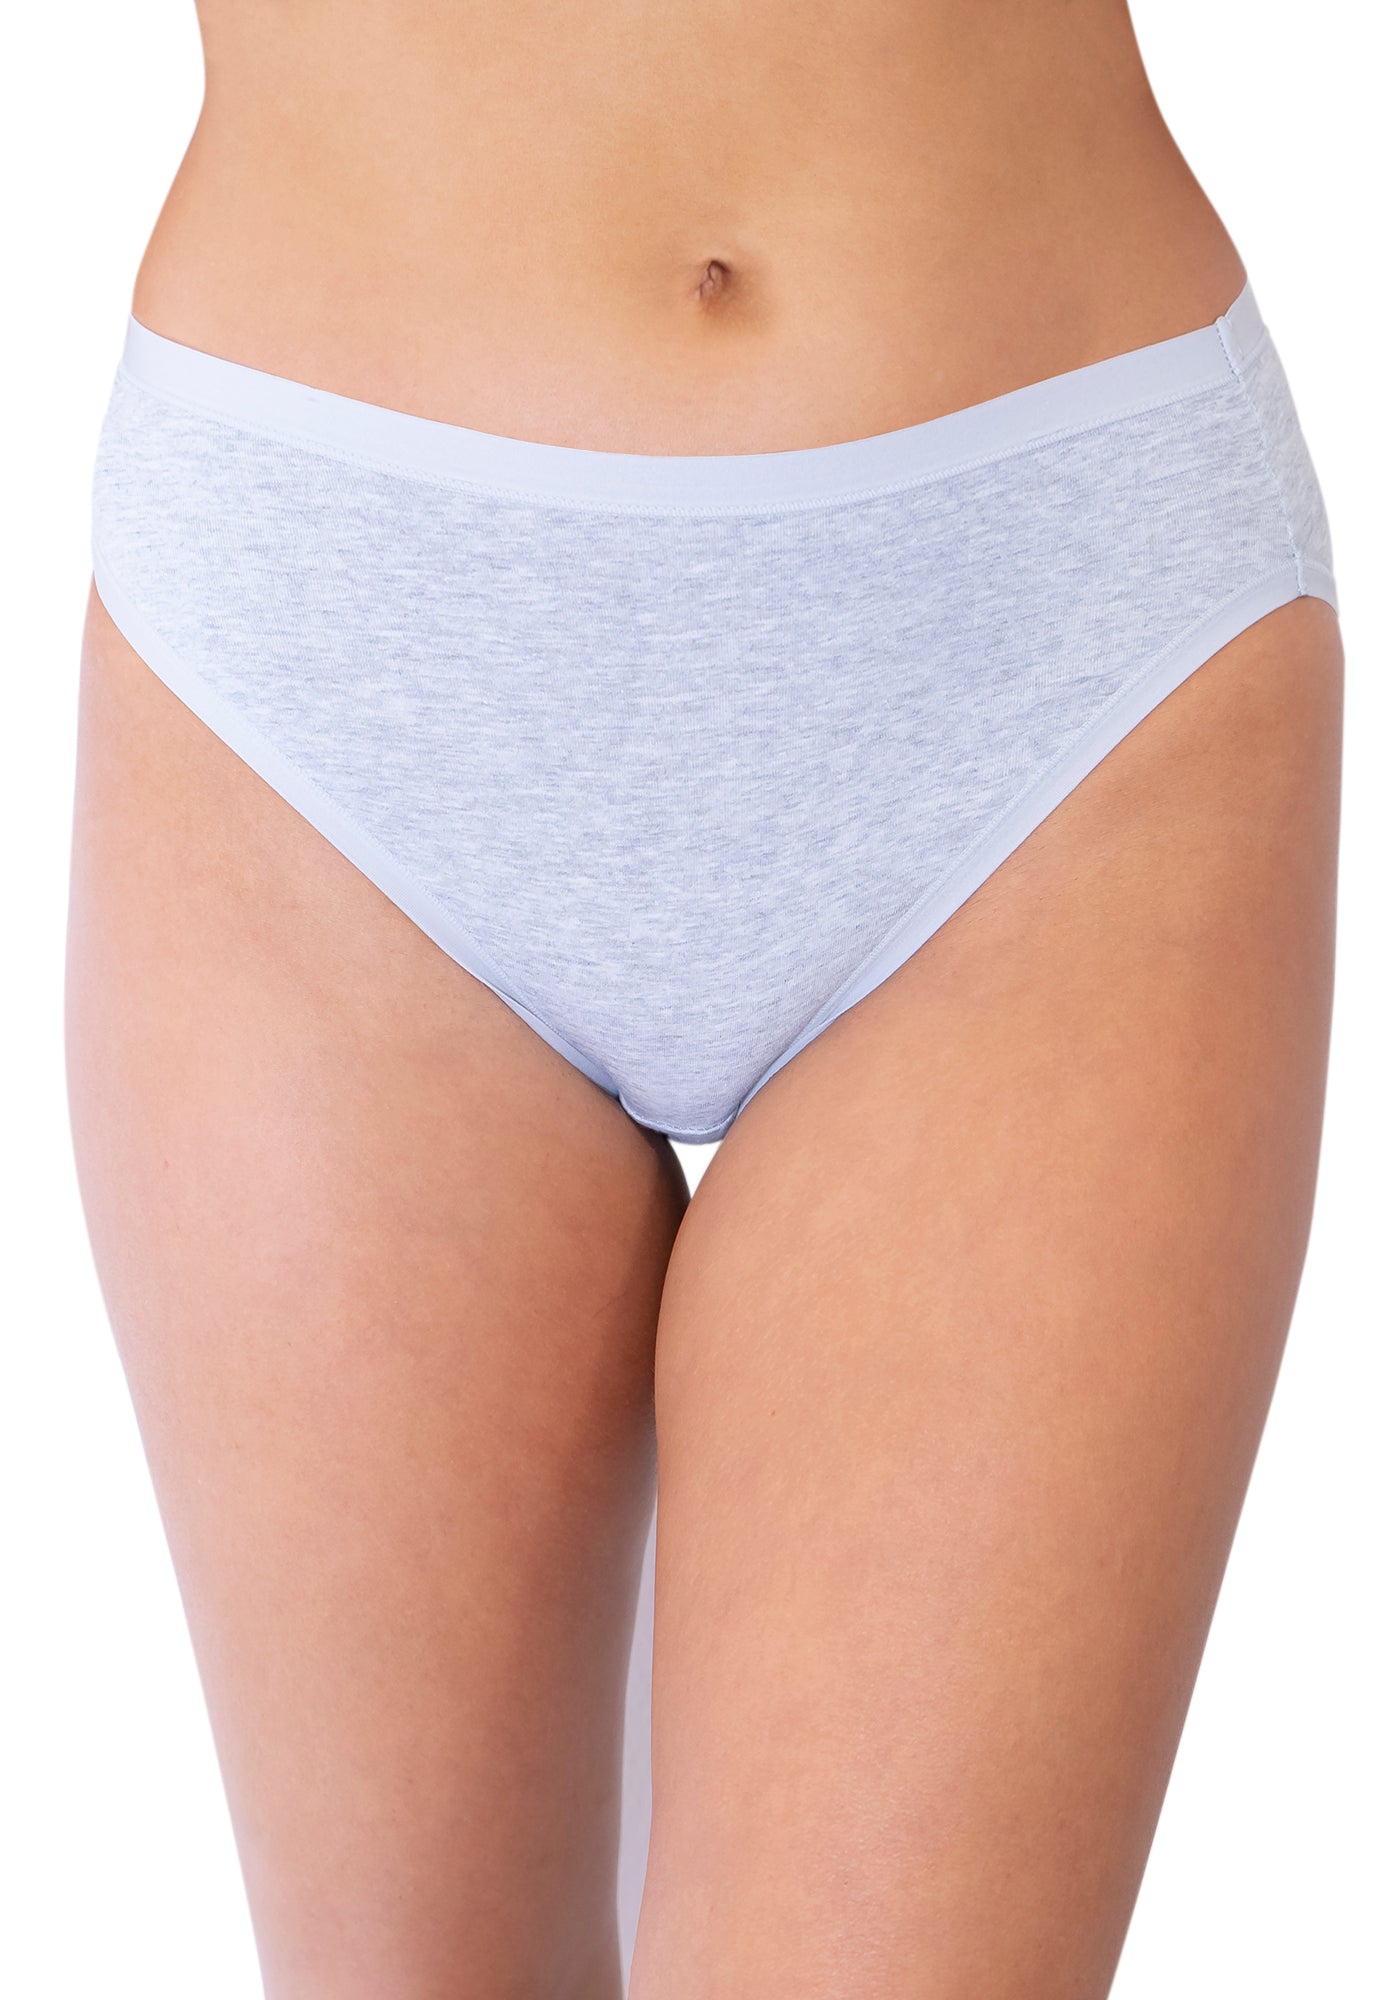 It-Se-Bit-Se LowCut Ladies Panties 6 Pack, XL Size (Color May Vary) :  : Fashion